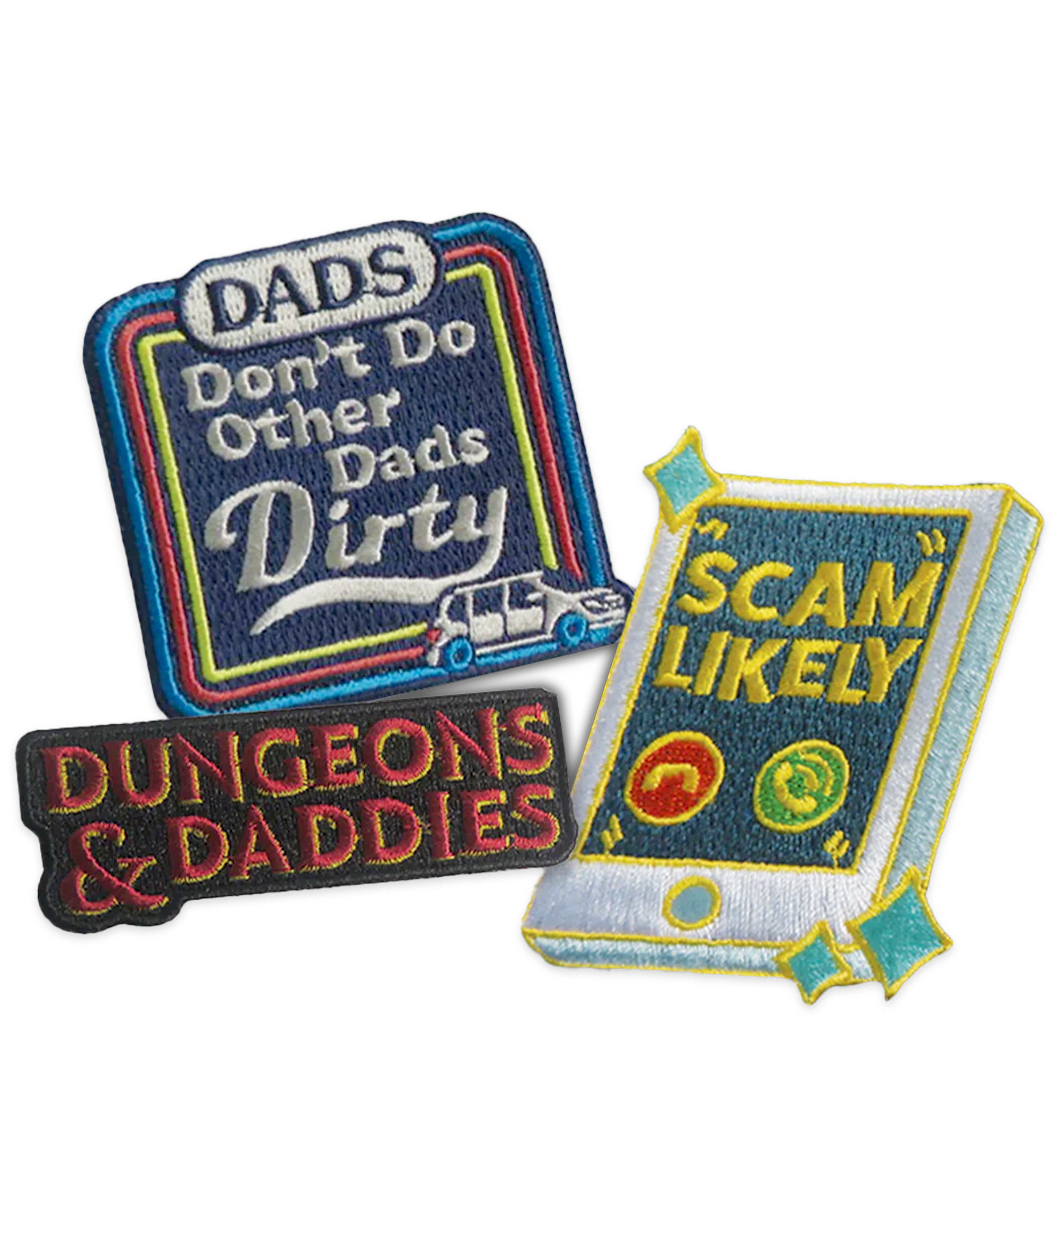 Three patches, one is the Dungeons & Daddies logo in red with yellow highlights on a black offset background. The second is an illustration of a phone that is rininging and the screen says SCAM LIKELY in yellow. The third patch says, 